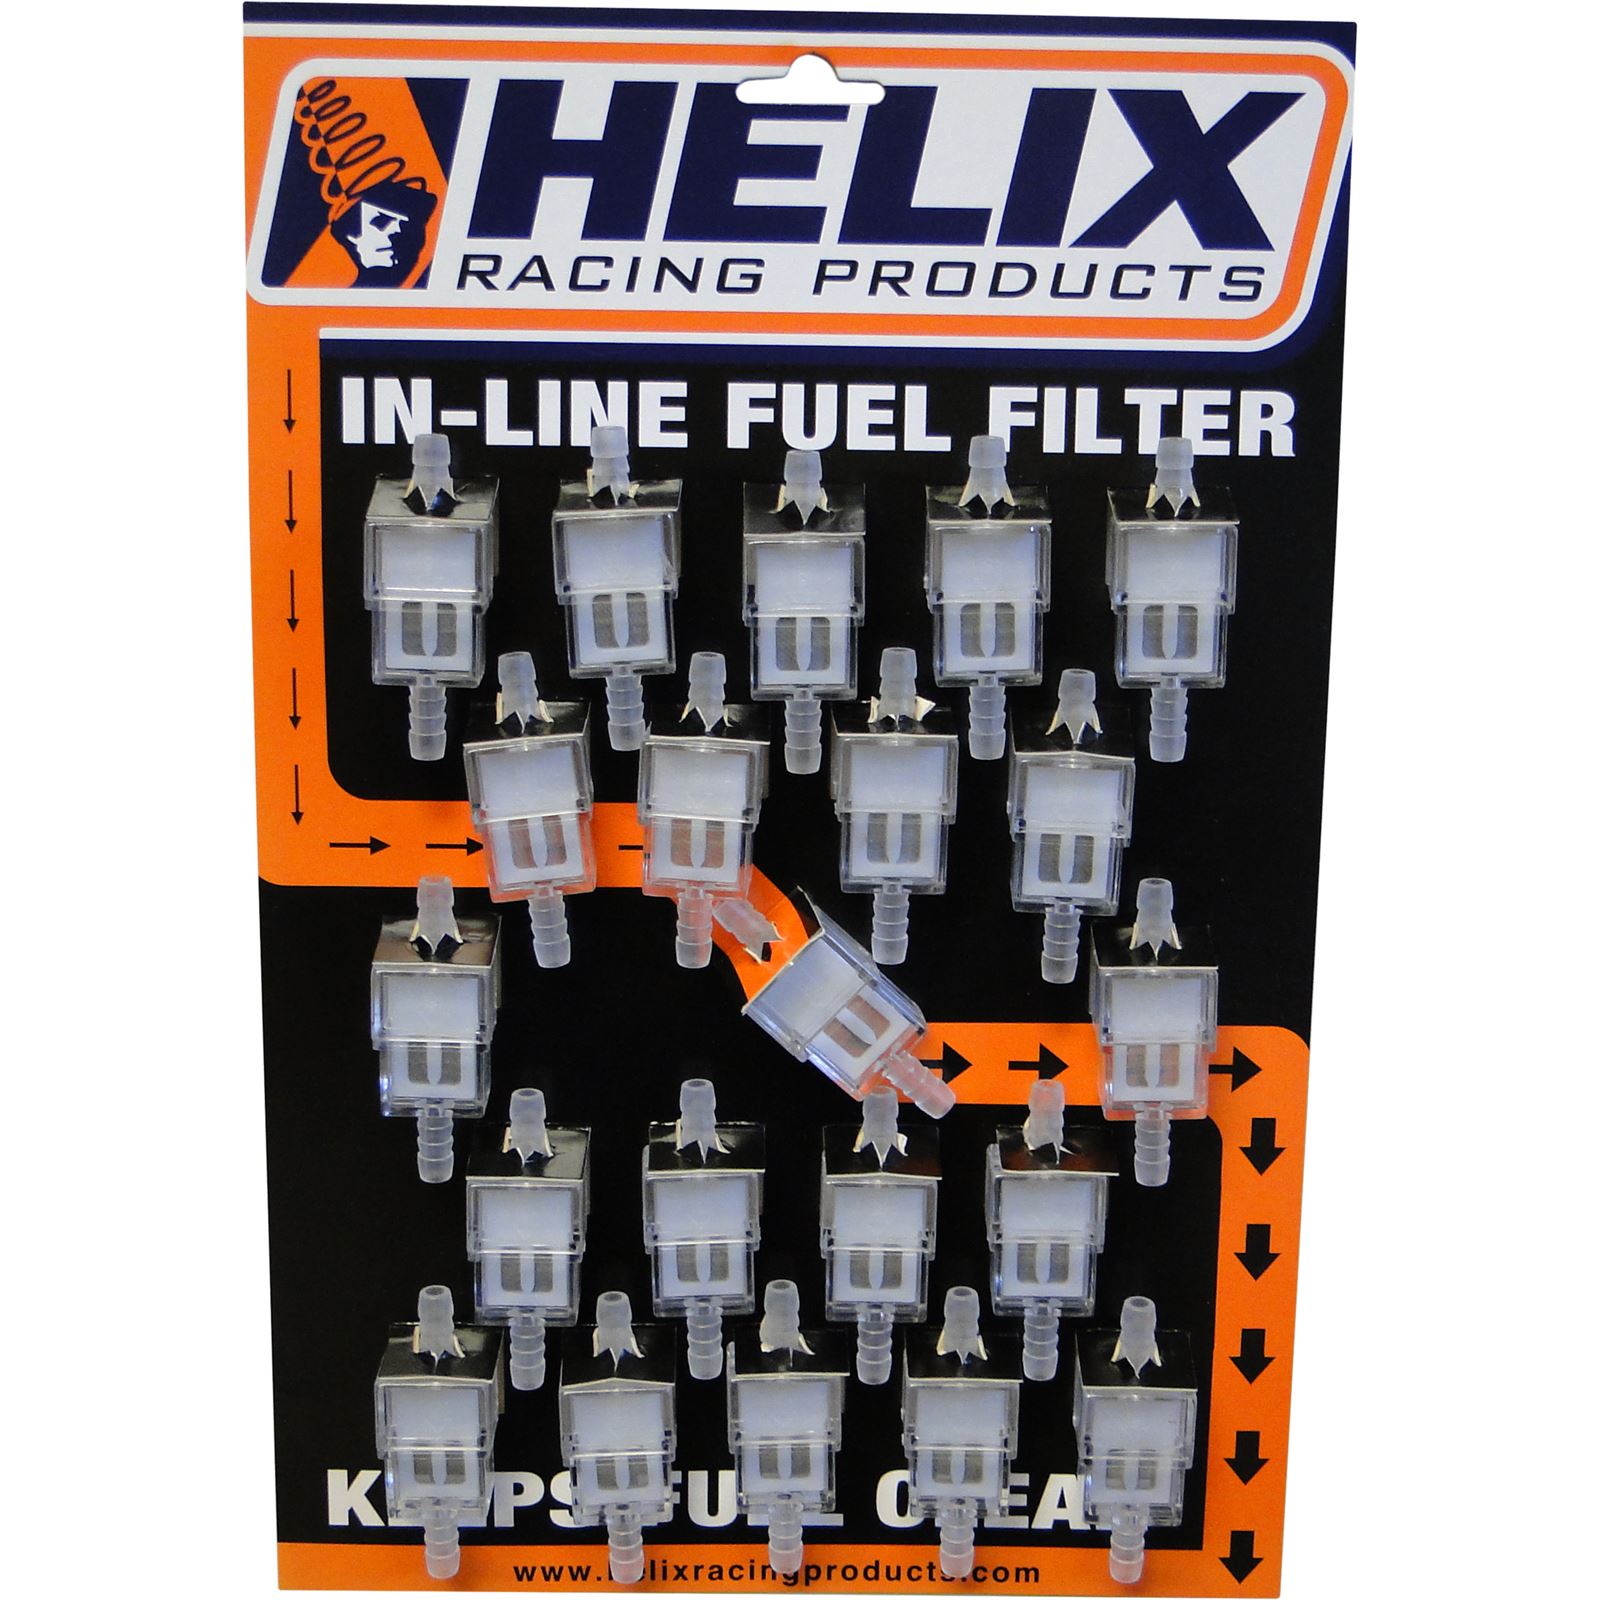 Helix 1/4" Fuel Filters 21 Pack with Display Card